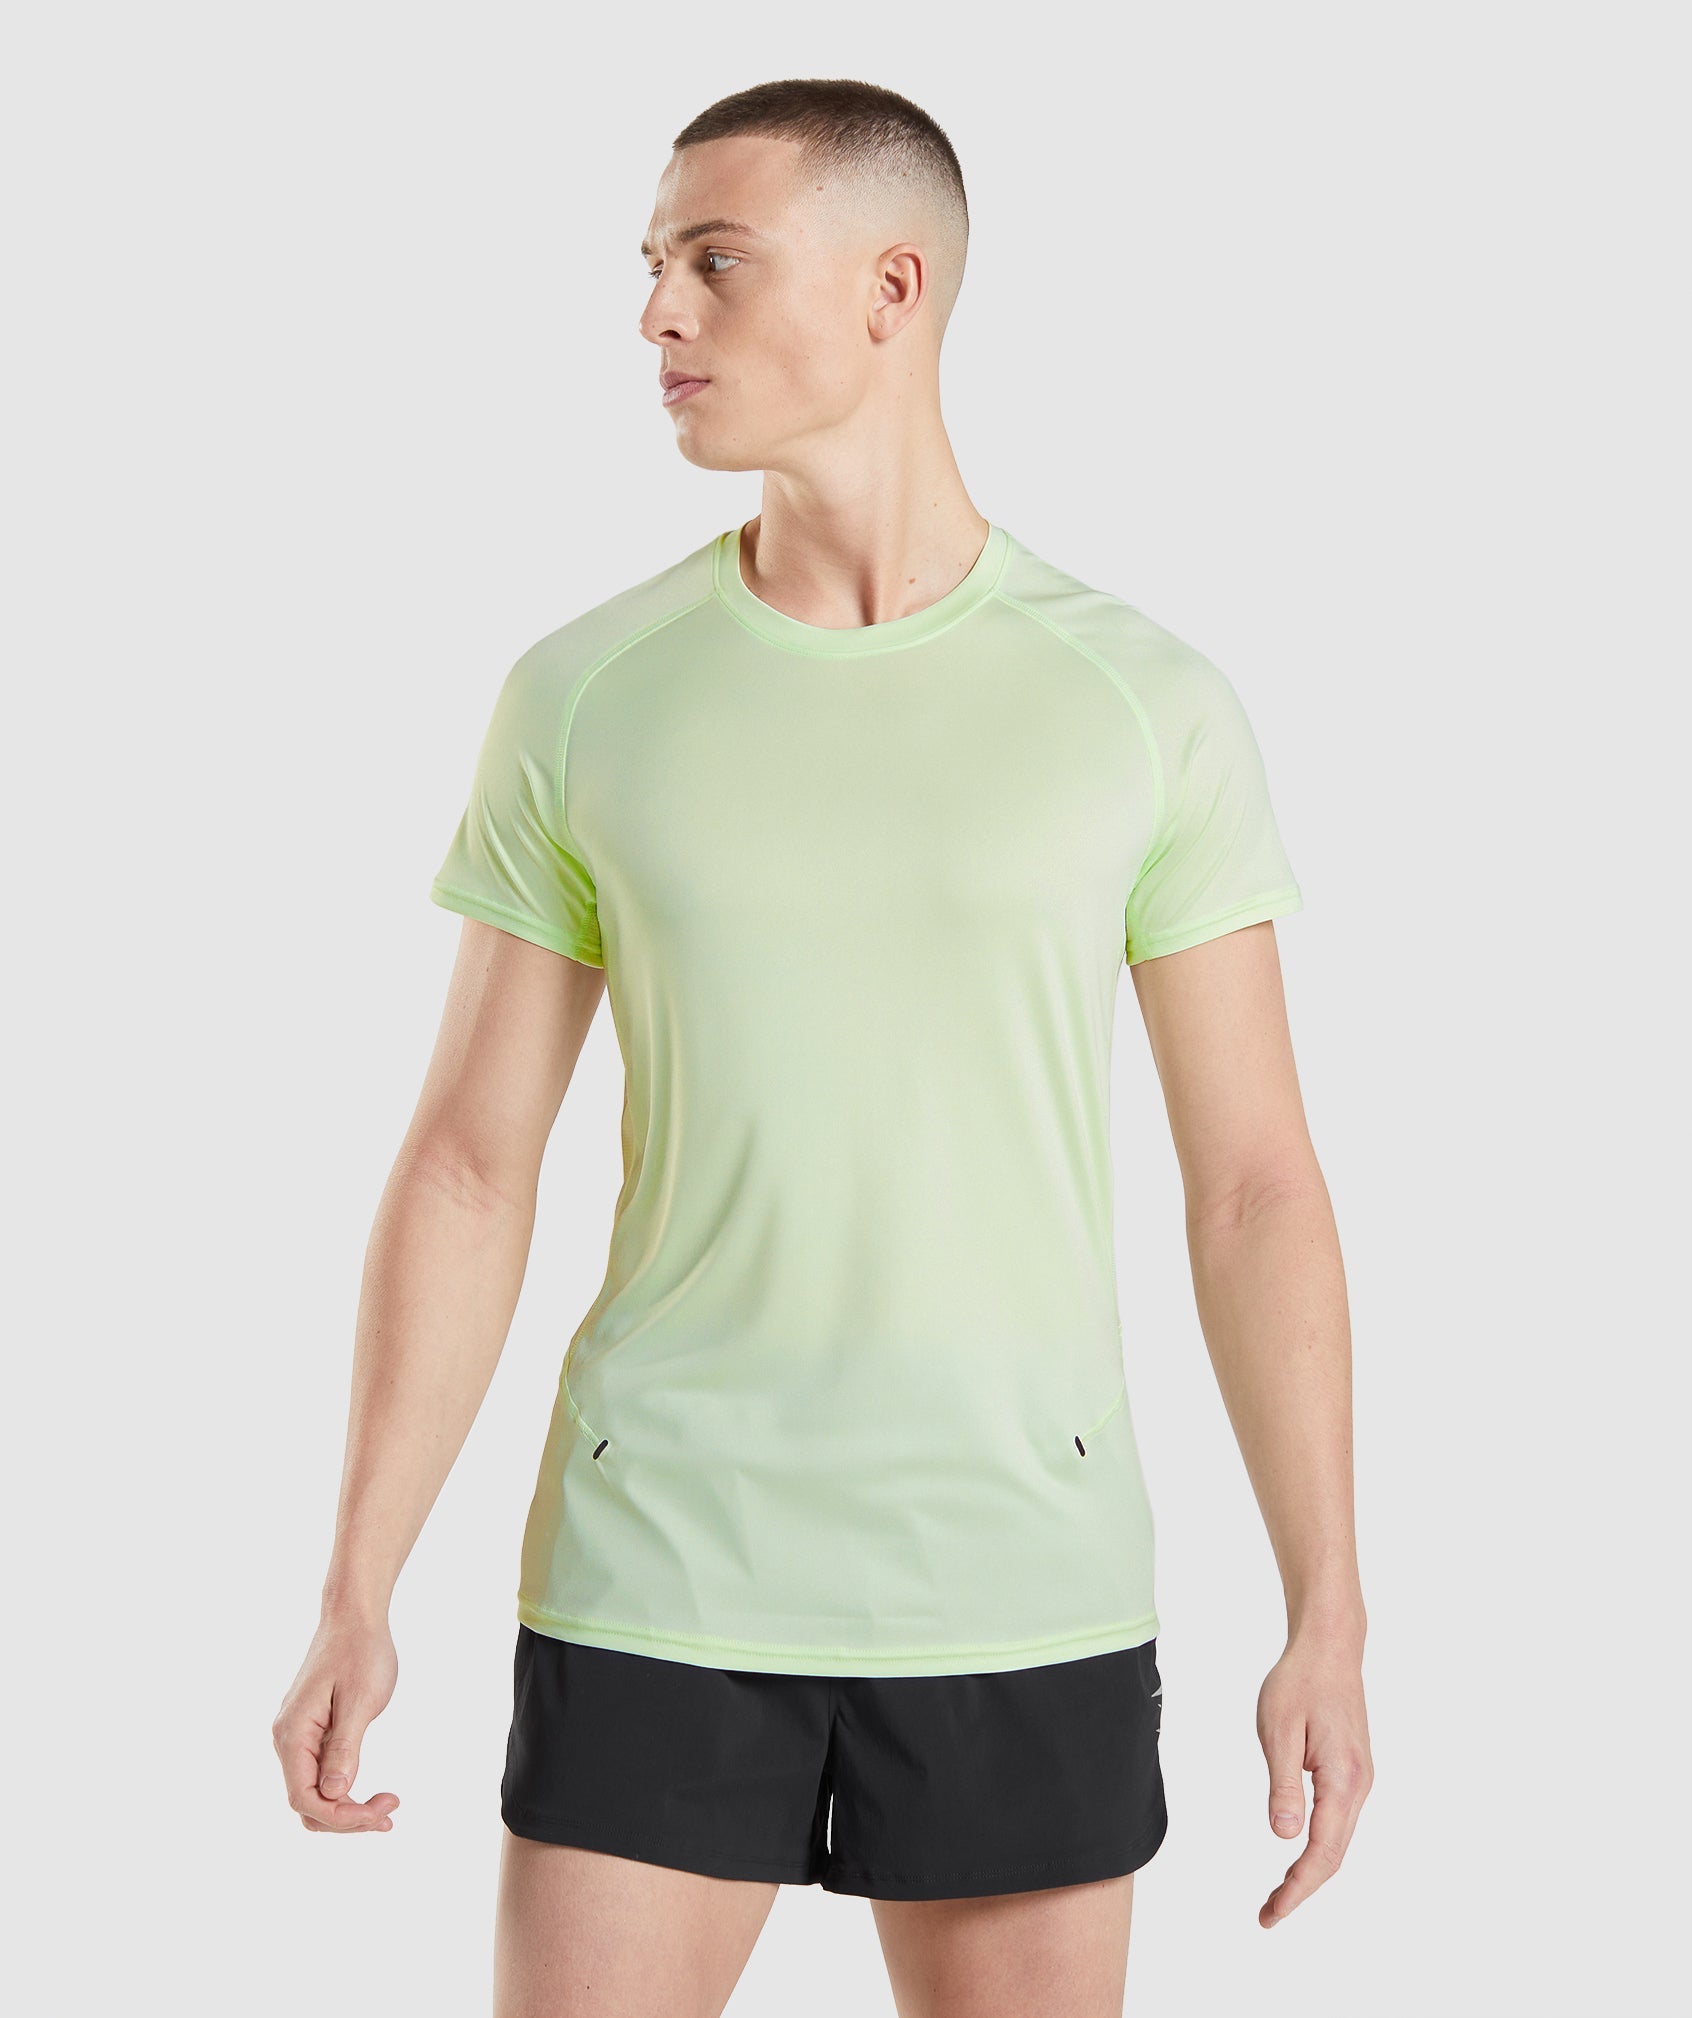 Speed Evolve T-Shirt in Cucumber Green - view 1